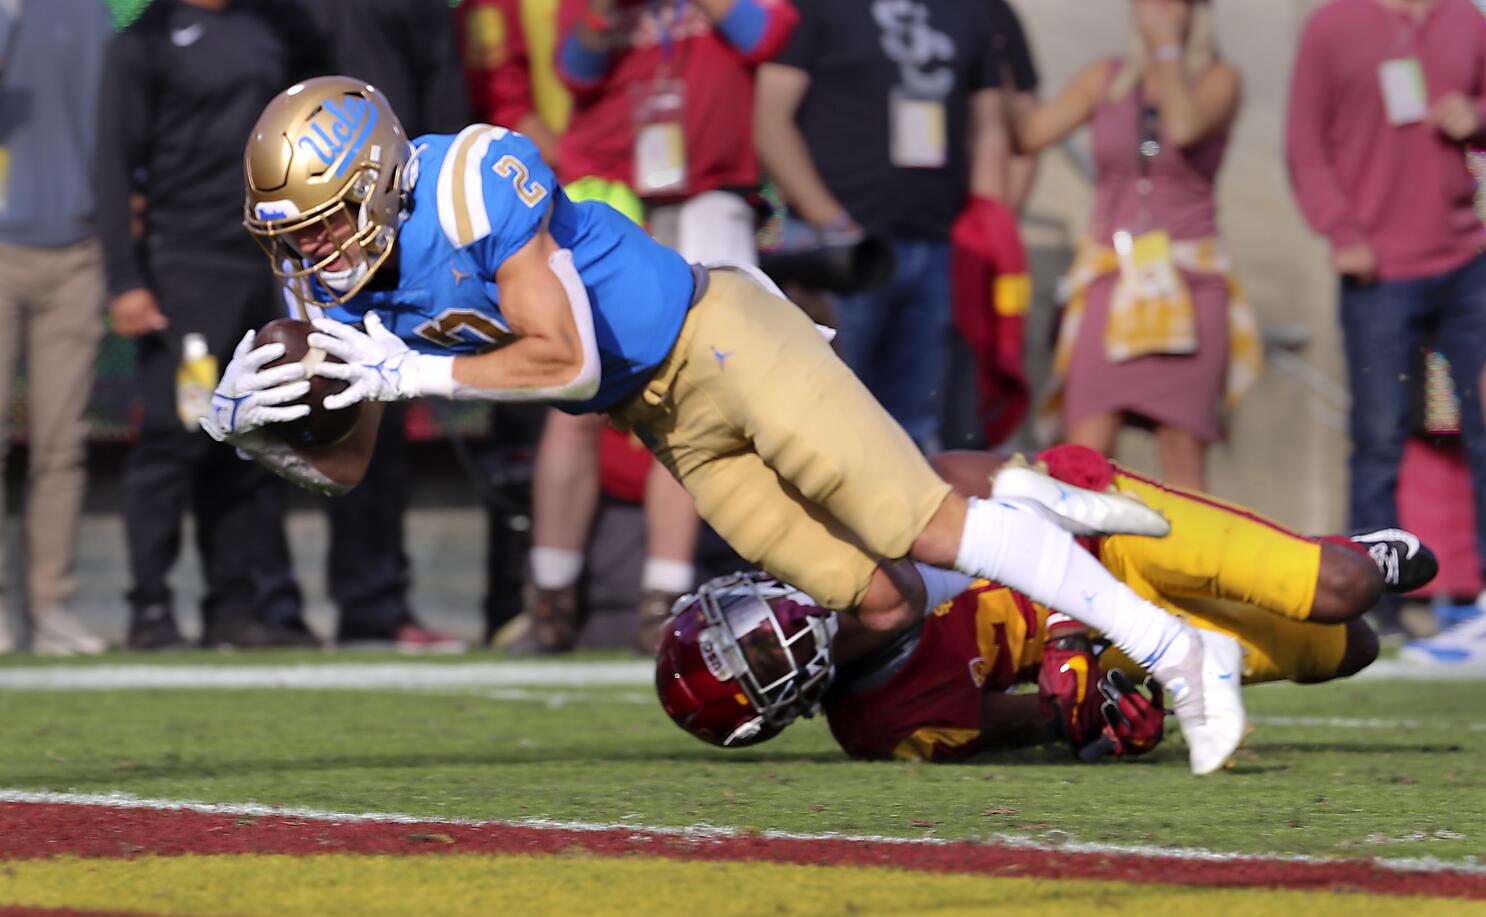 UCLA receiver Kyle Philips declares for NFL draft - Los Angeles Times